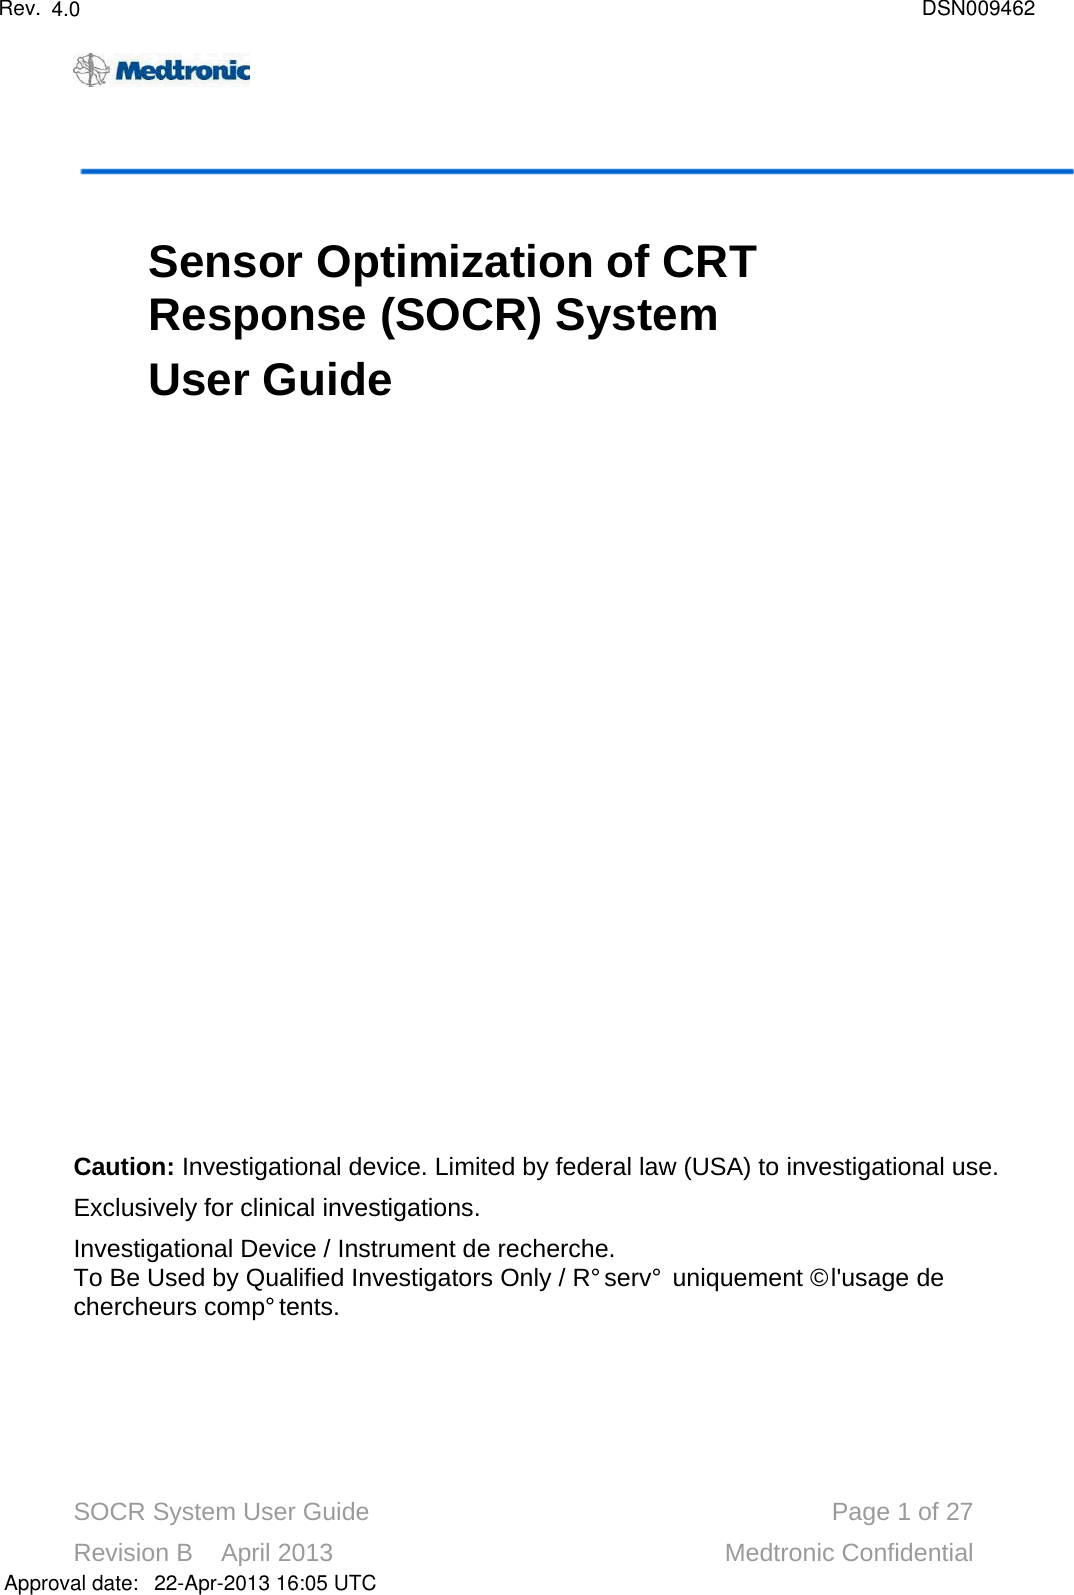 SOCR System User Guide Page 1of 27Revision B    April 2013 Medtronic ConfidentialSensor Optimization of CRT Response (SOCR) SystemUser GuideCaution: Investigational device. Limited by federal law (USA) to investigational use.Exclusively for clinical investigations.Investigational Device / Instrument de recherche.To Be Used by Qualified Investigators Only / Réservé uniquement à l&apos;usage de chercheurs compétents.Approval date:4.0 DSN00946222-Apr-2013 16:05 UTCRev.